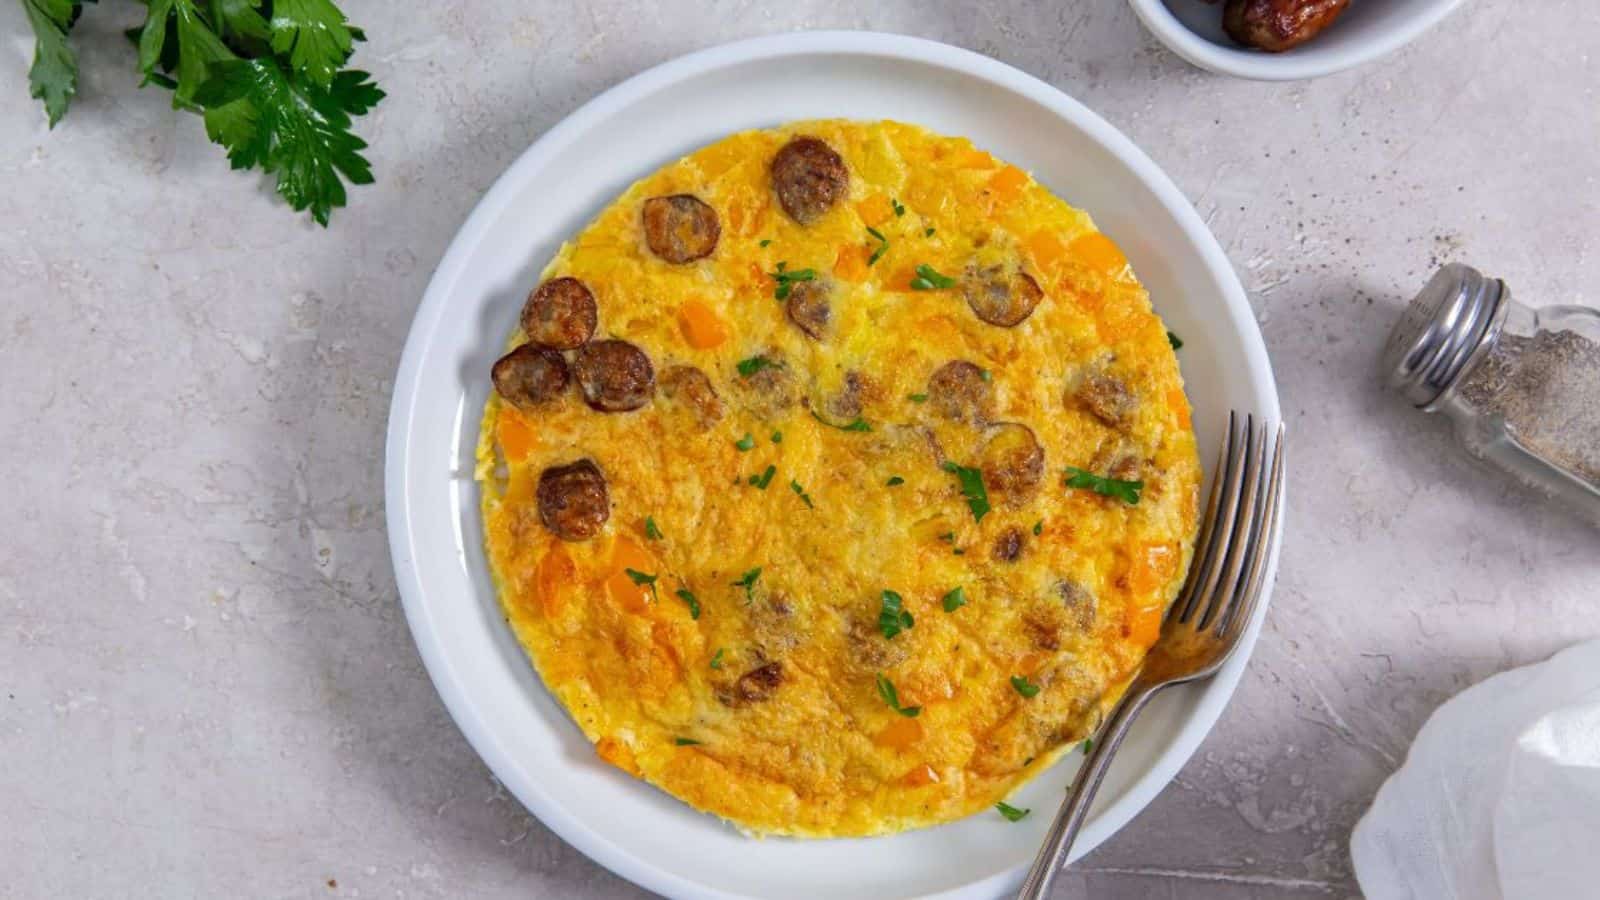 Air Fryer Omelette with bell peppers, parsley, cheese, and sausage on a white plate with a fork.